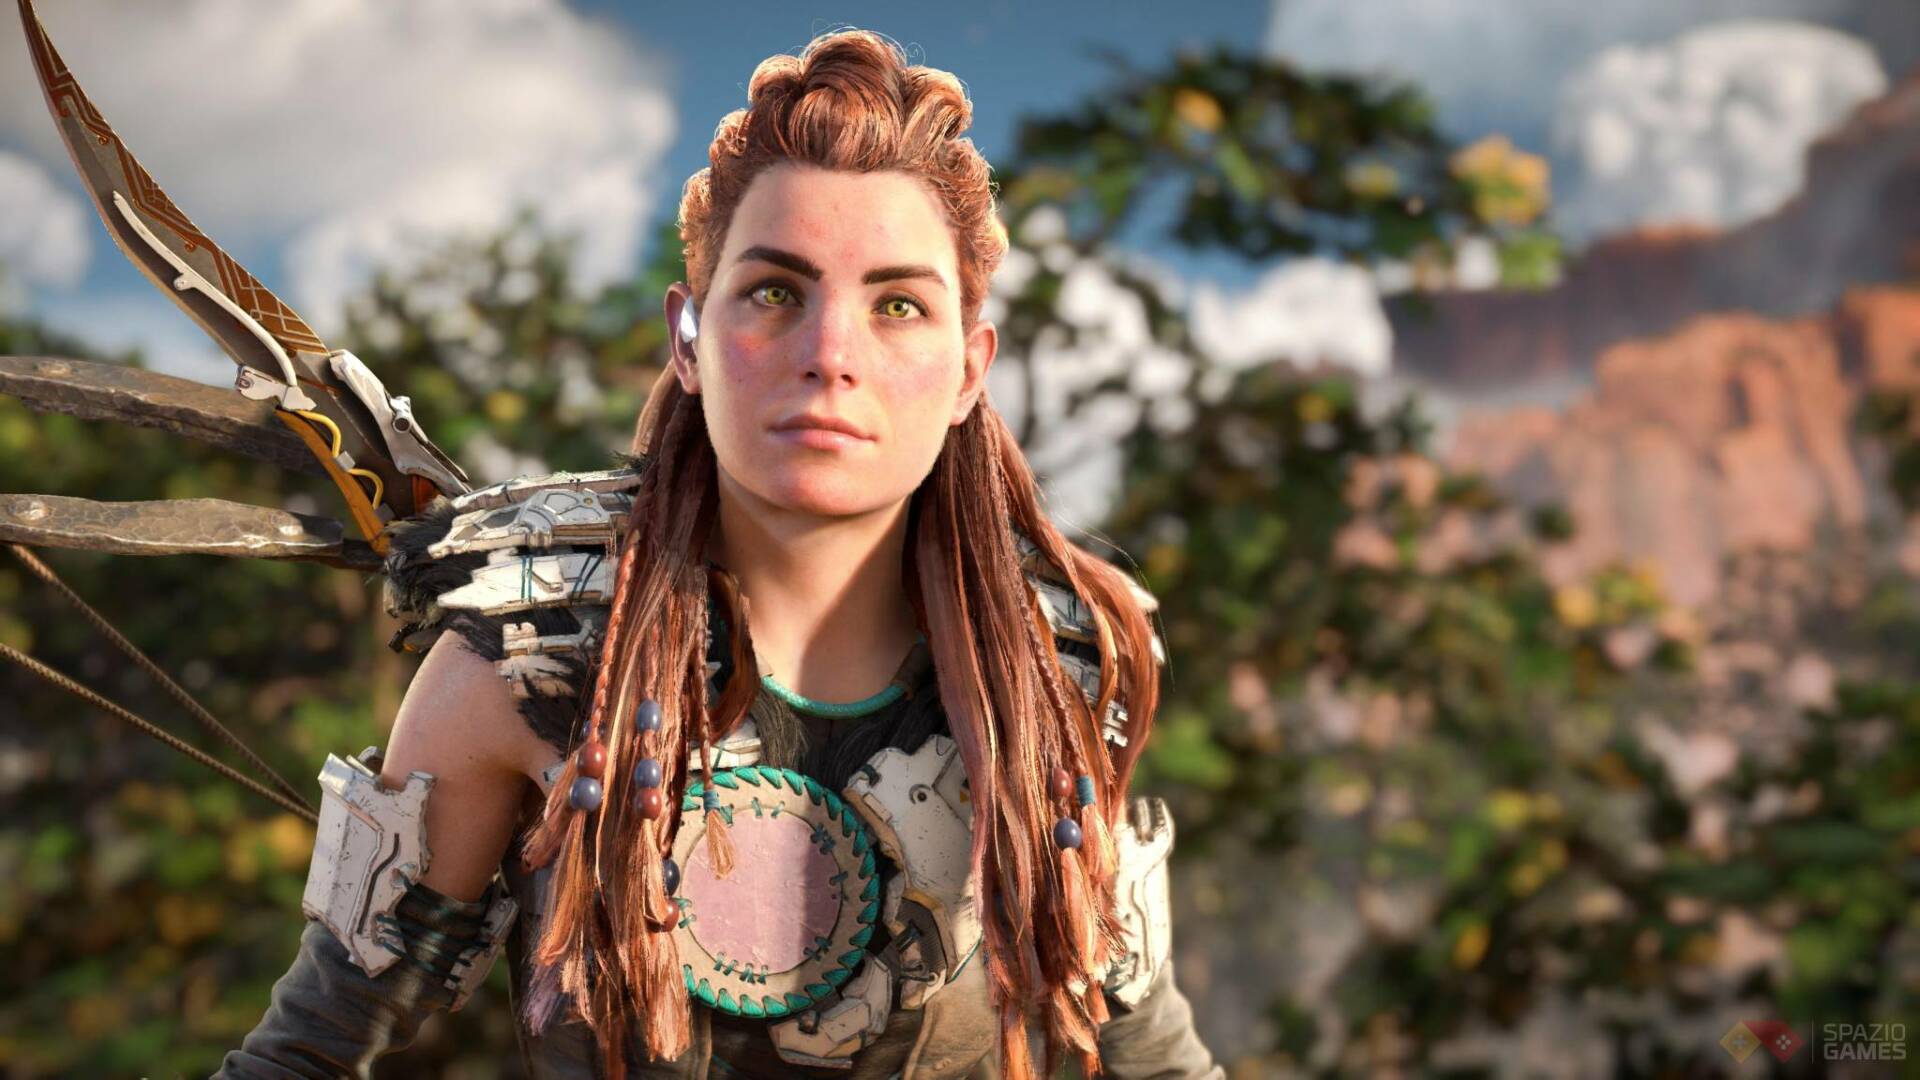 Horizon fans are choosing their Aloy for the Netflix series